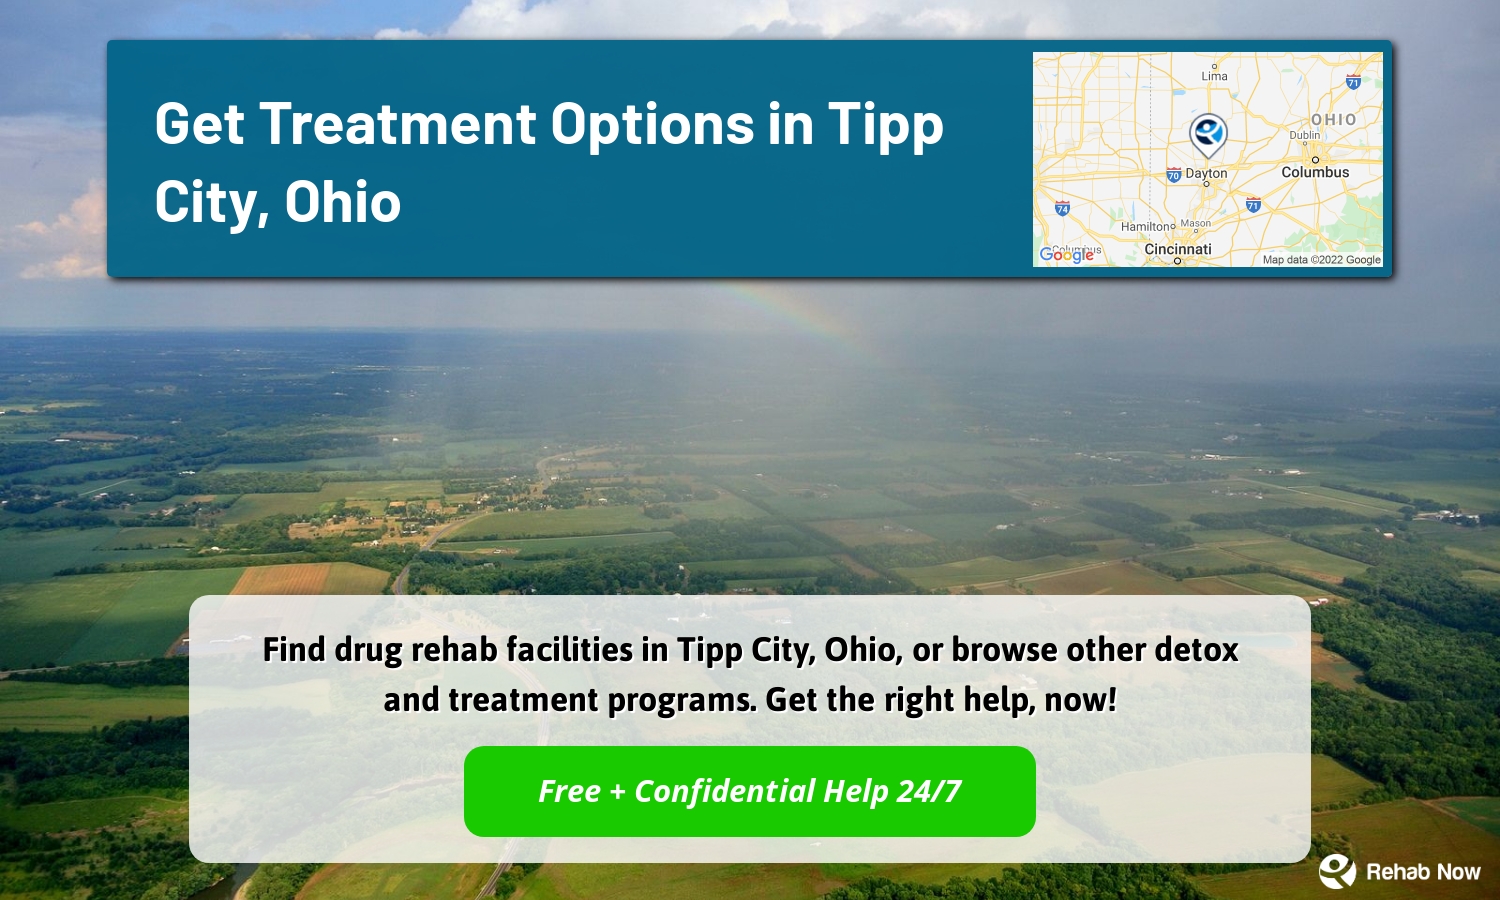 Find drug rehab facilities in Tipp City, Ohio, or browse other detox and treatment programs. Get the right help, now!